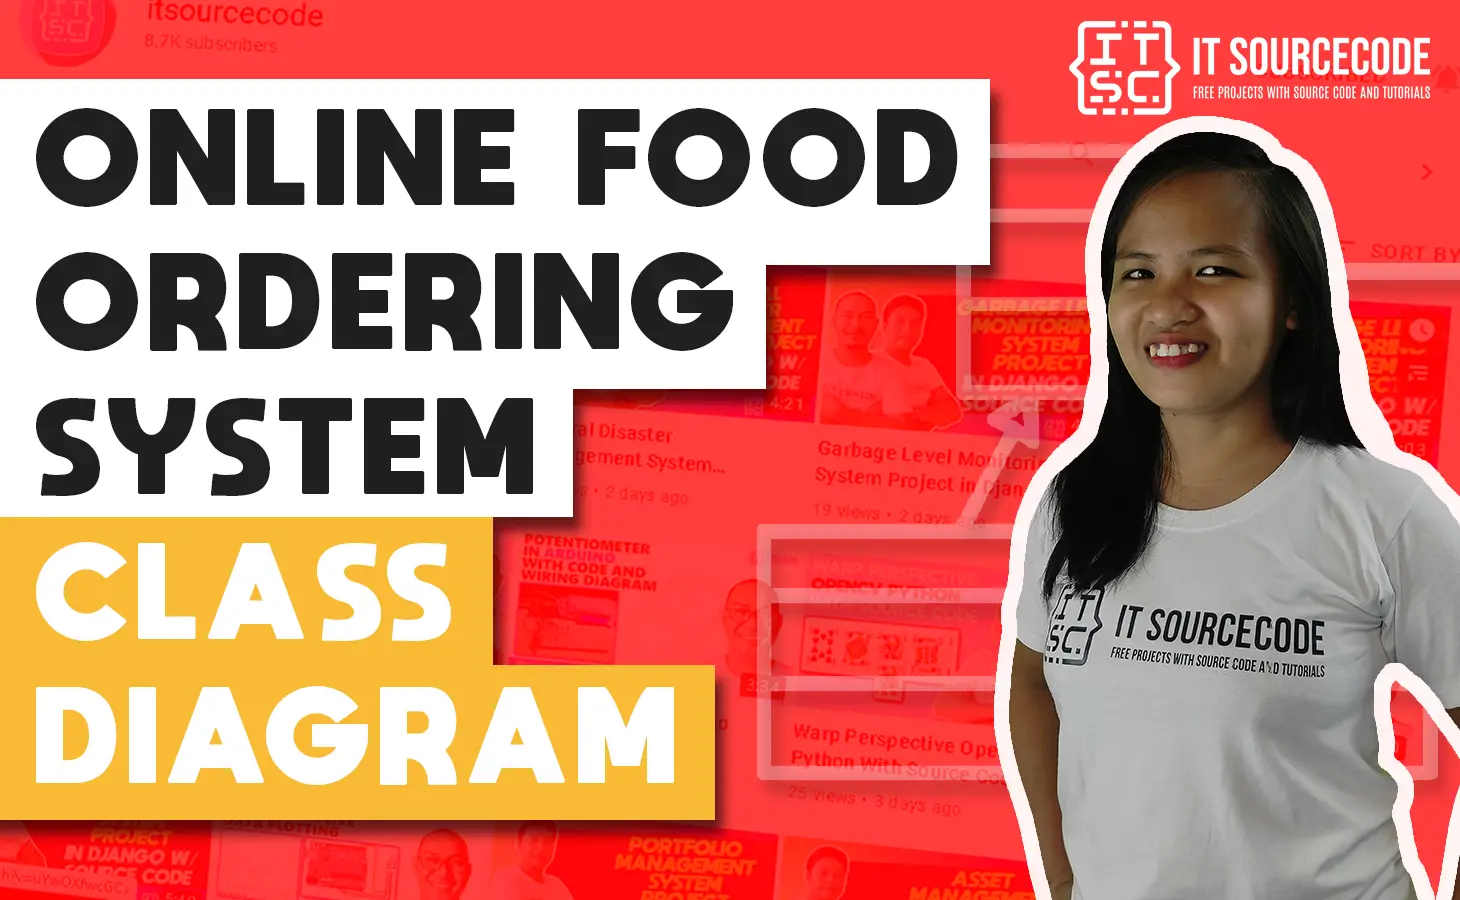 Online Food Ordering System Class Diagram